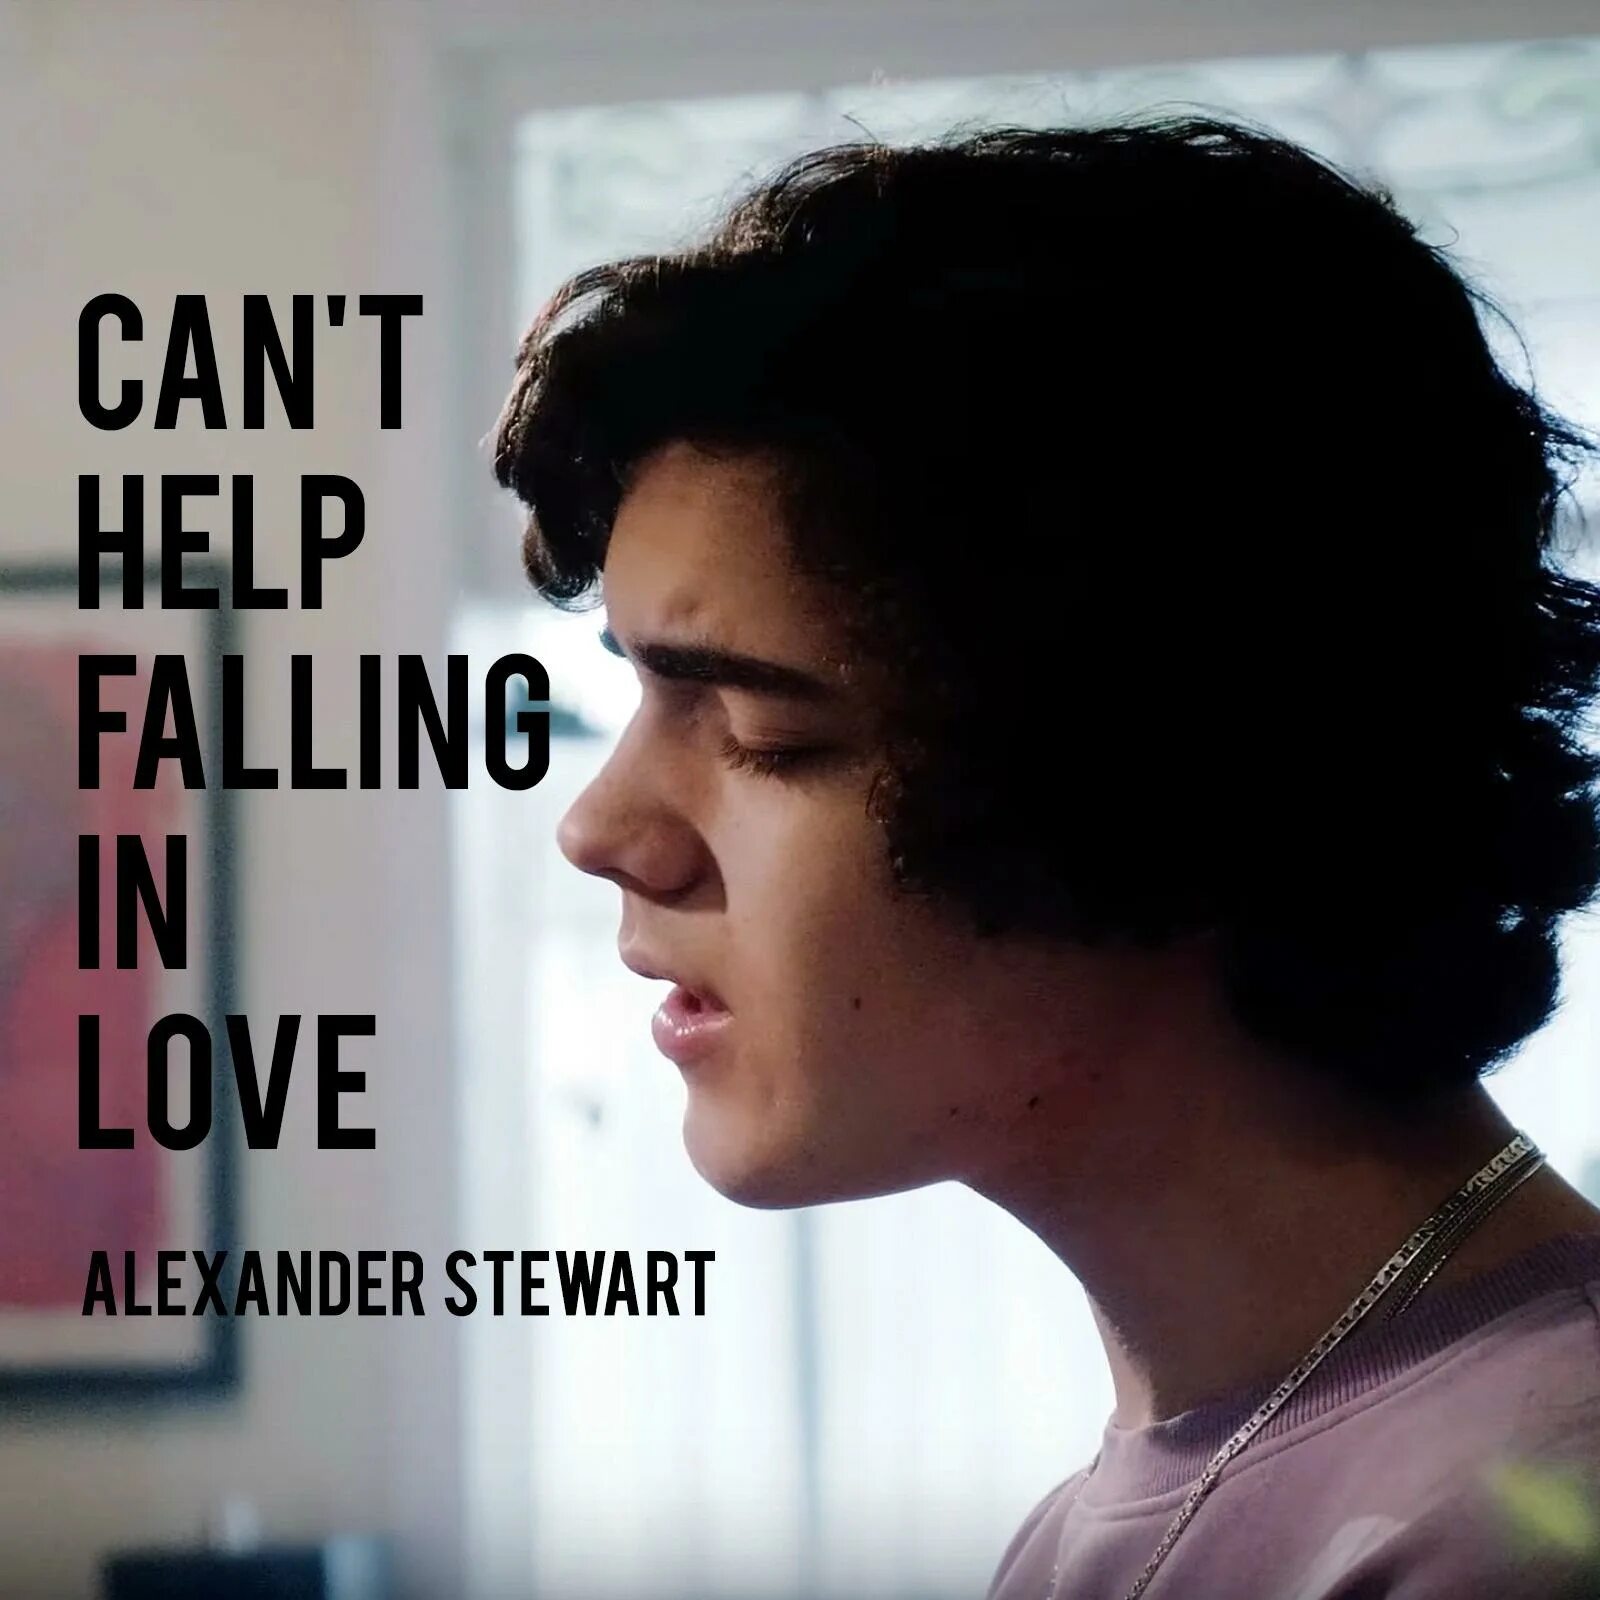 Cant help. Single - Alexander Stewart. Alexander Stewart - this is your Life. Falling in Love кто исполняет. Саша Трусова can't help Falling in Love.